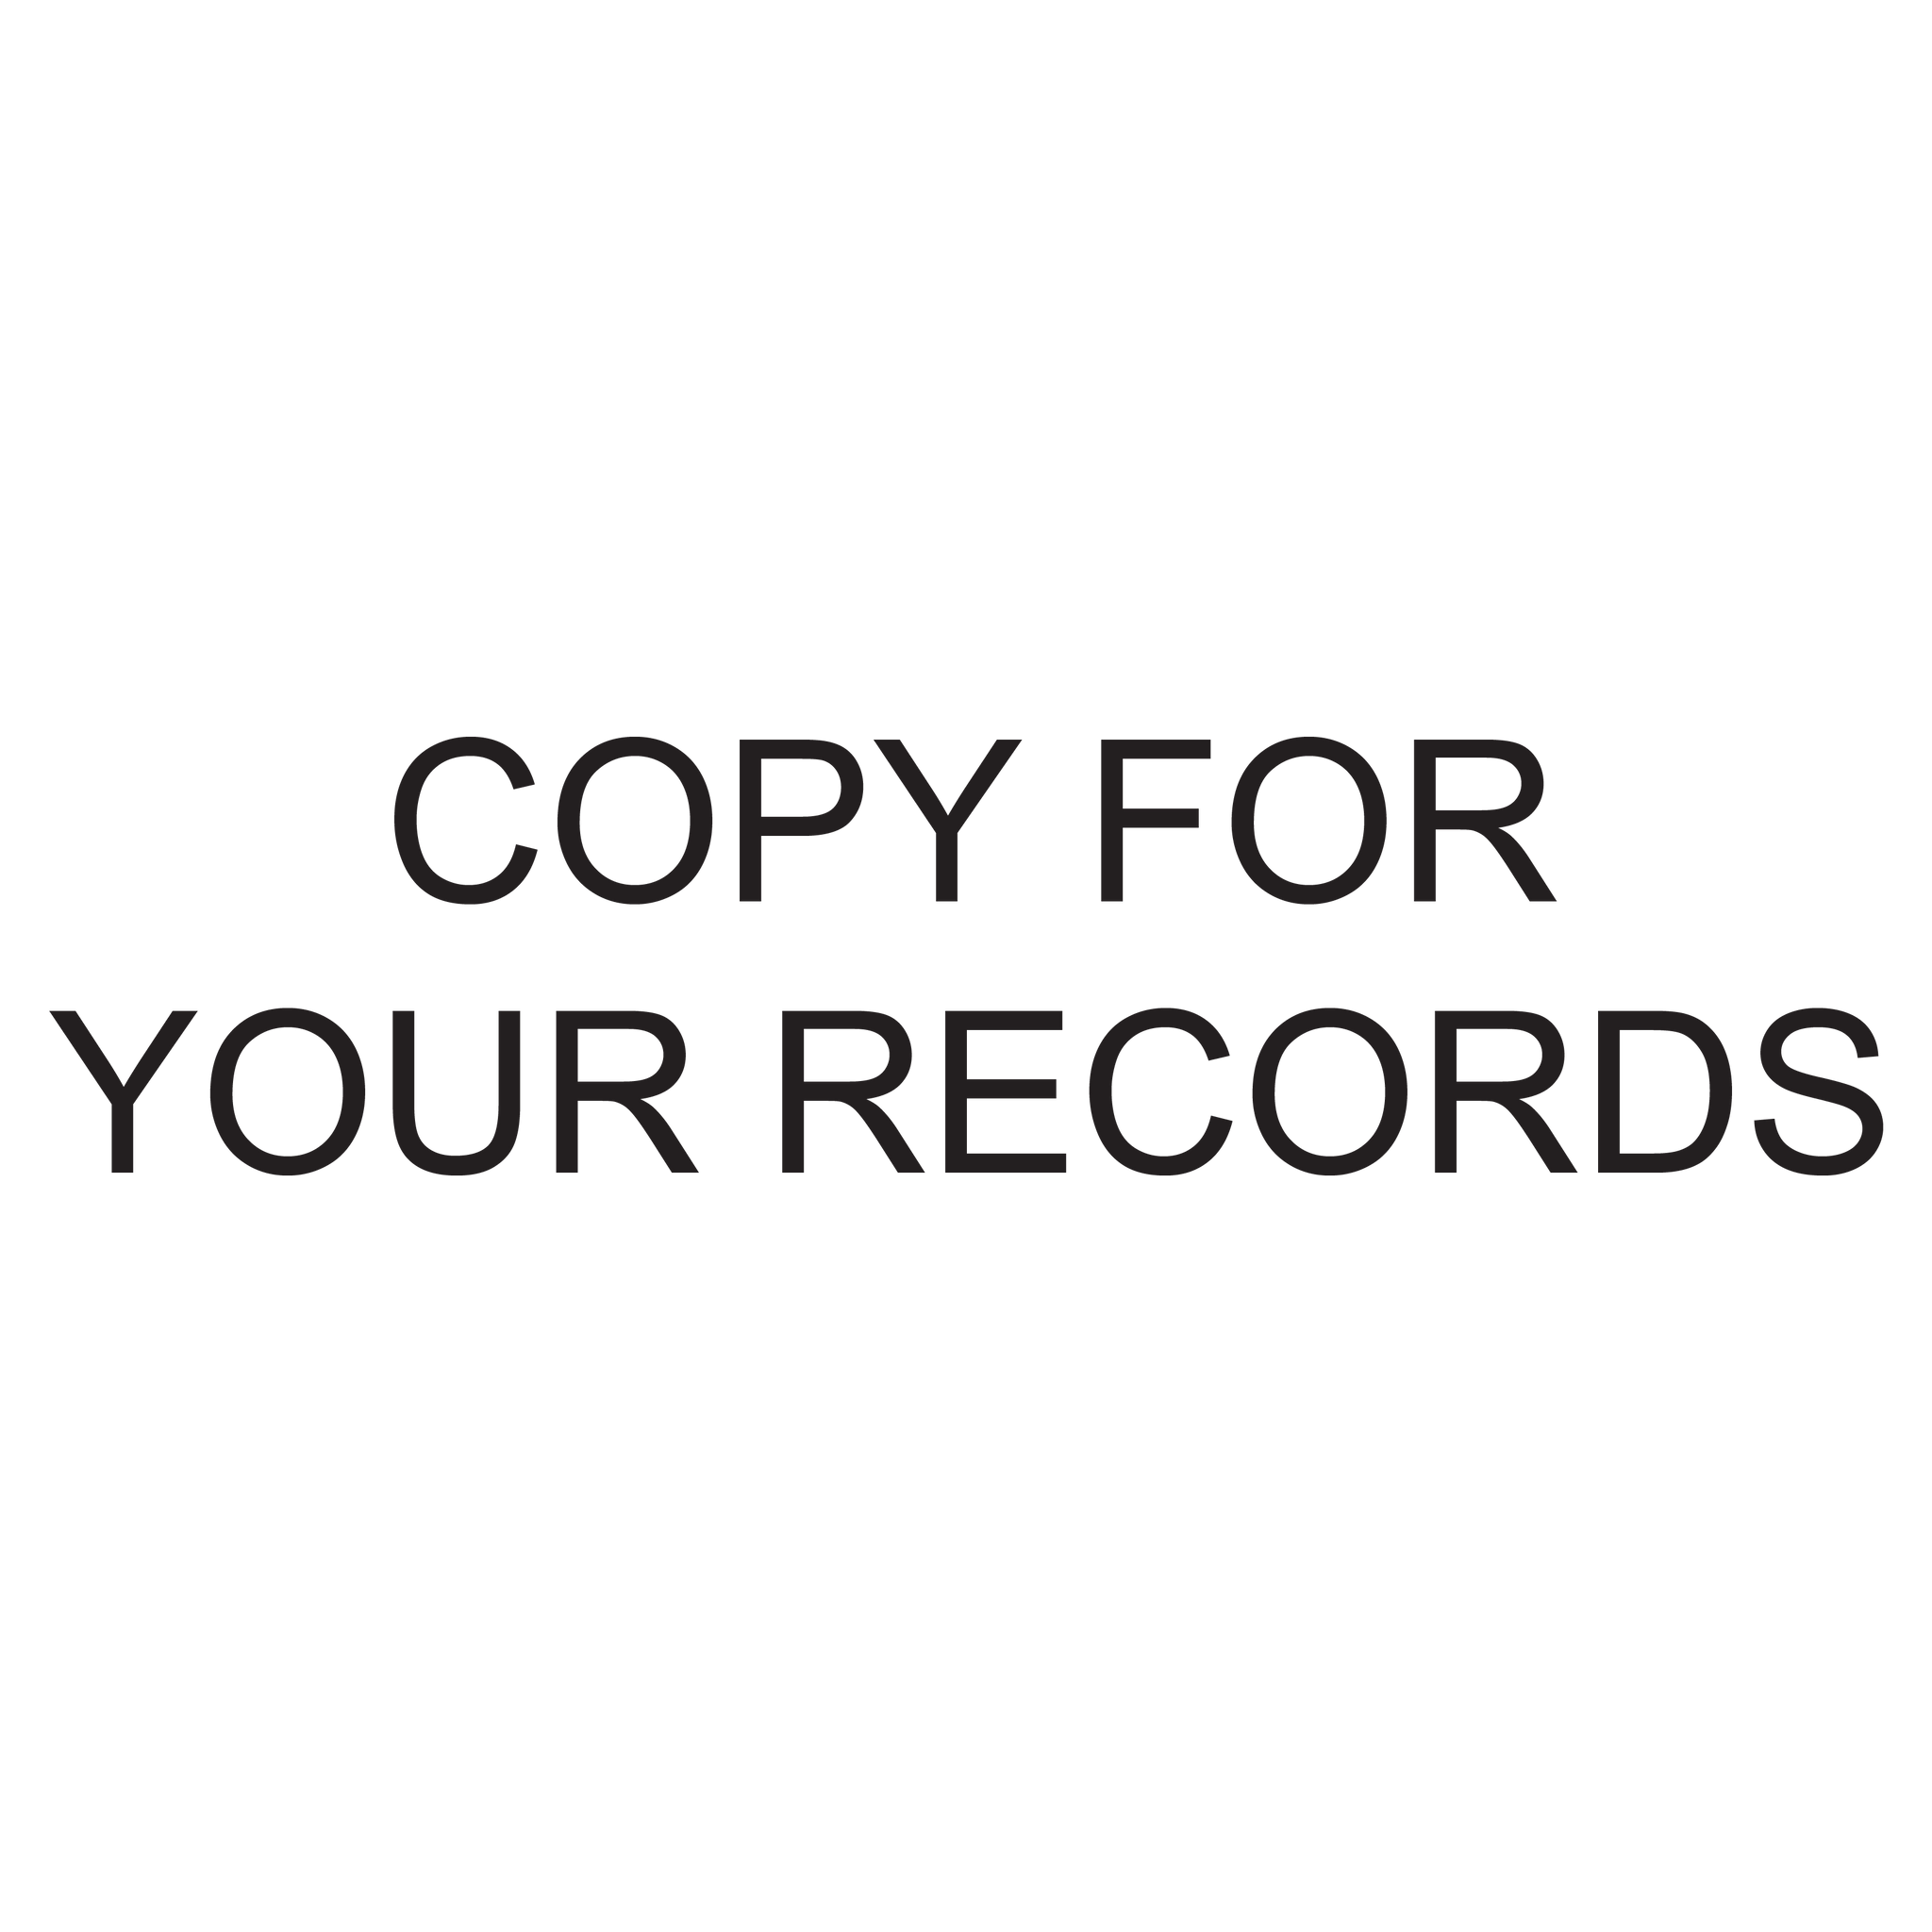 COPY FOR YOUR RECORDS Stamp